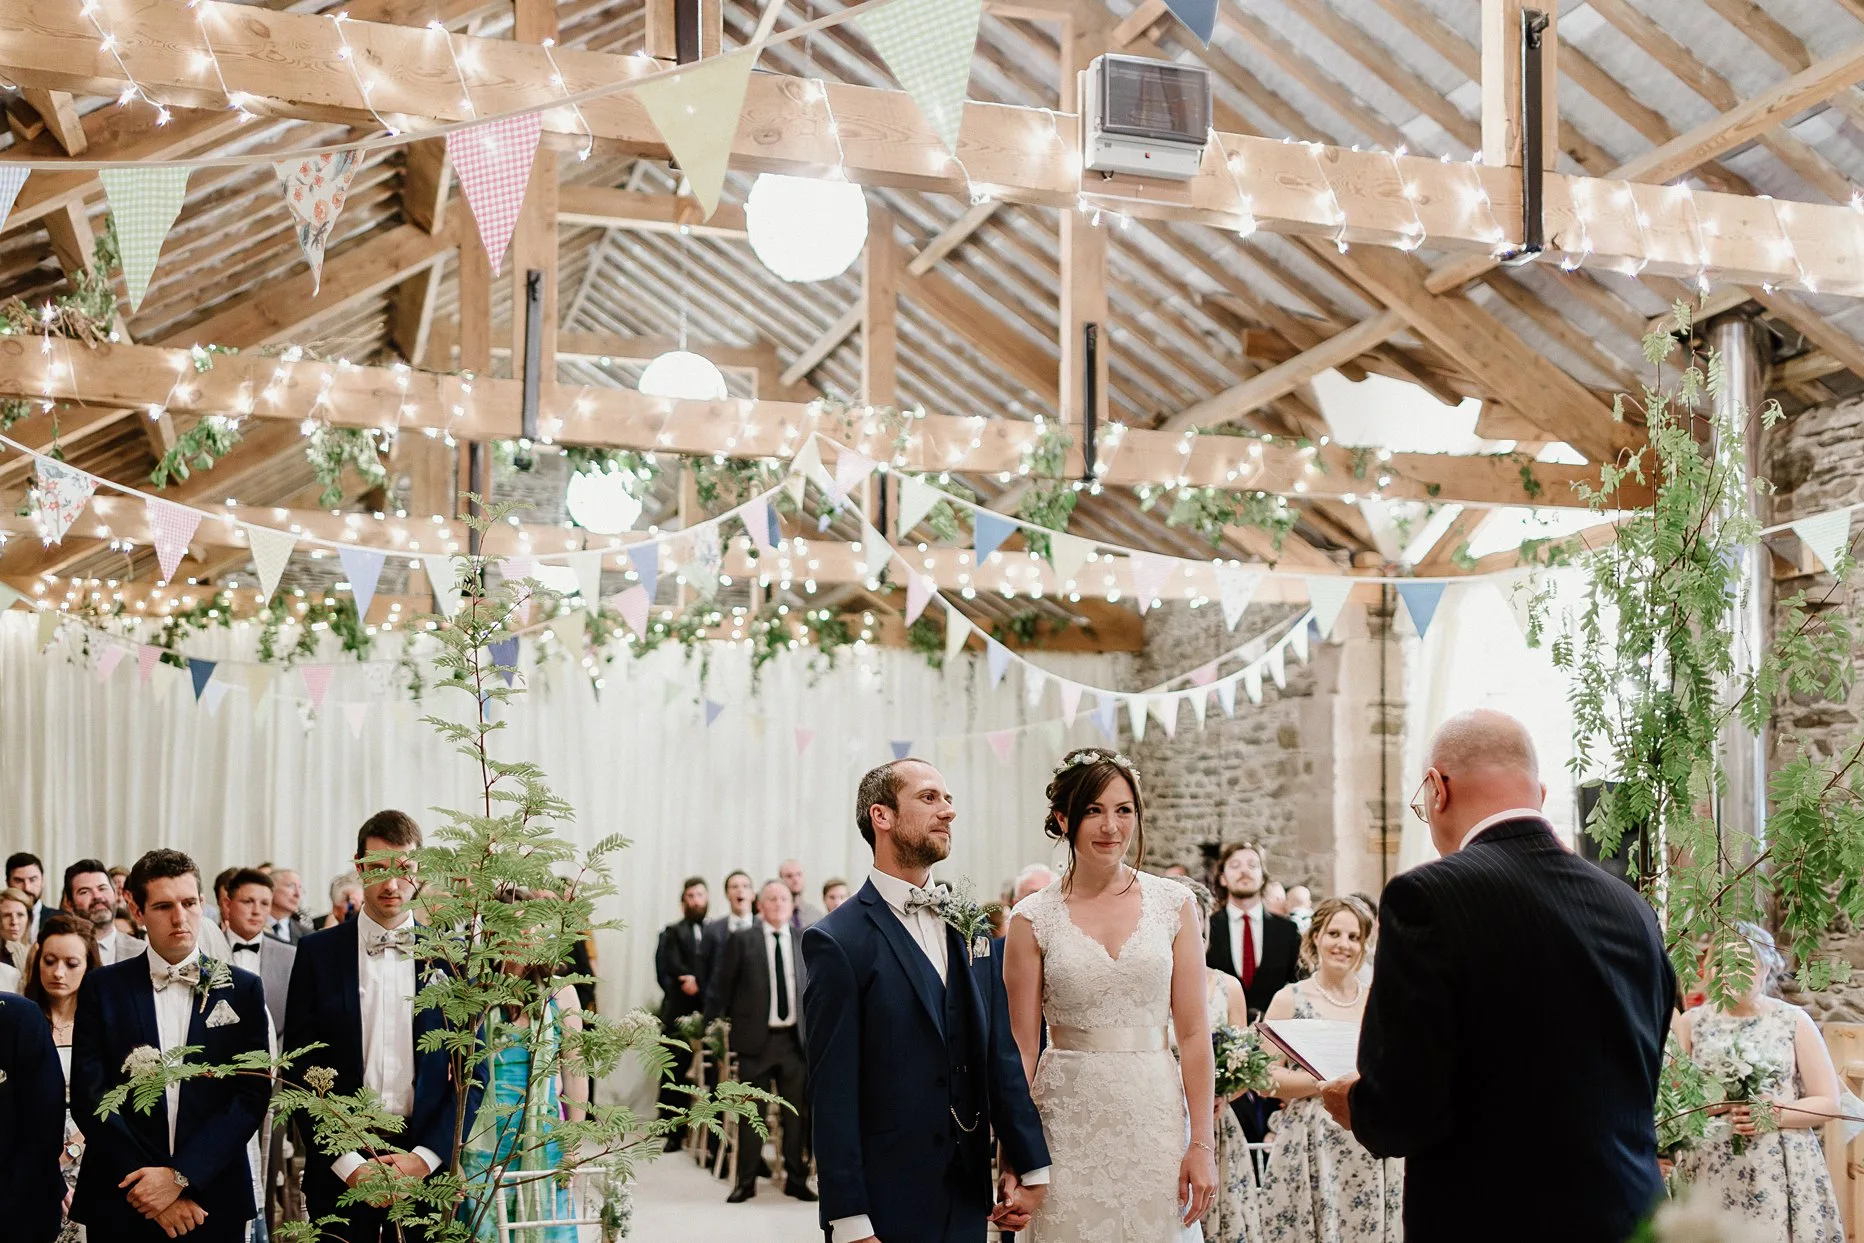 Bride and groom holding hands stood at the front of their wedding ceremony at New House Farm in the Lake District. The ceremony barn is decorated with bunting on the wooden beams.